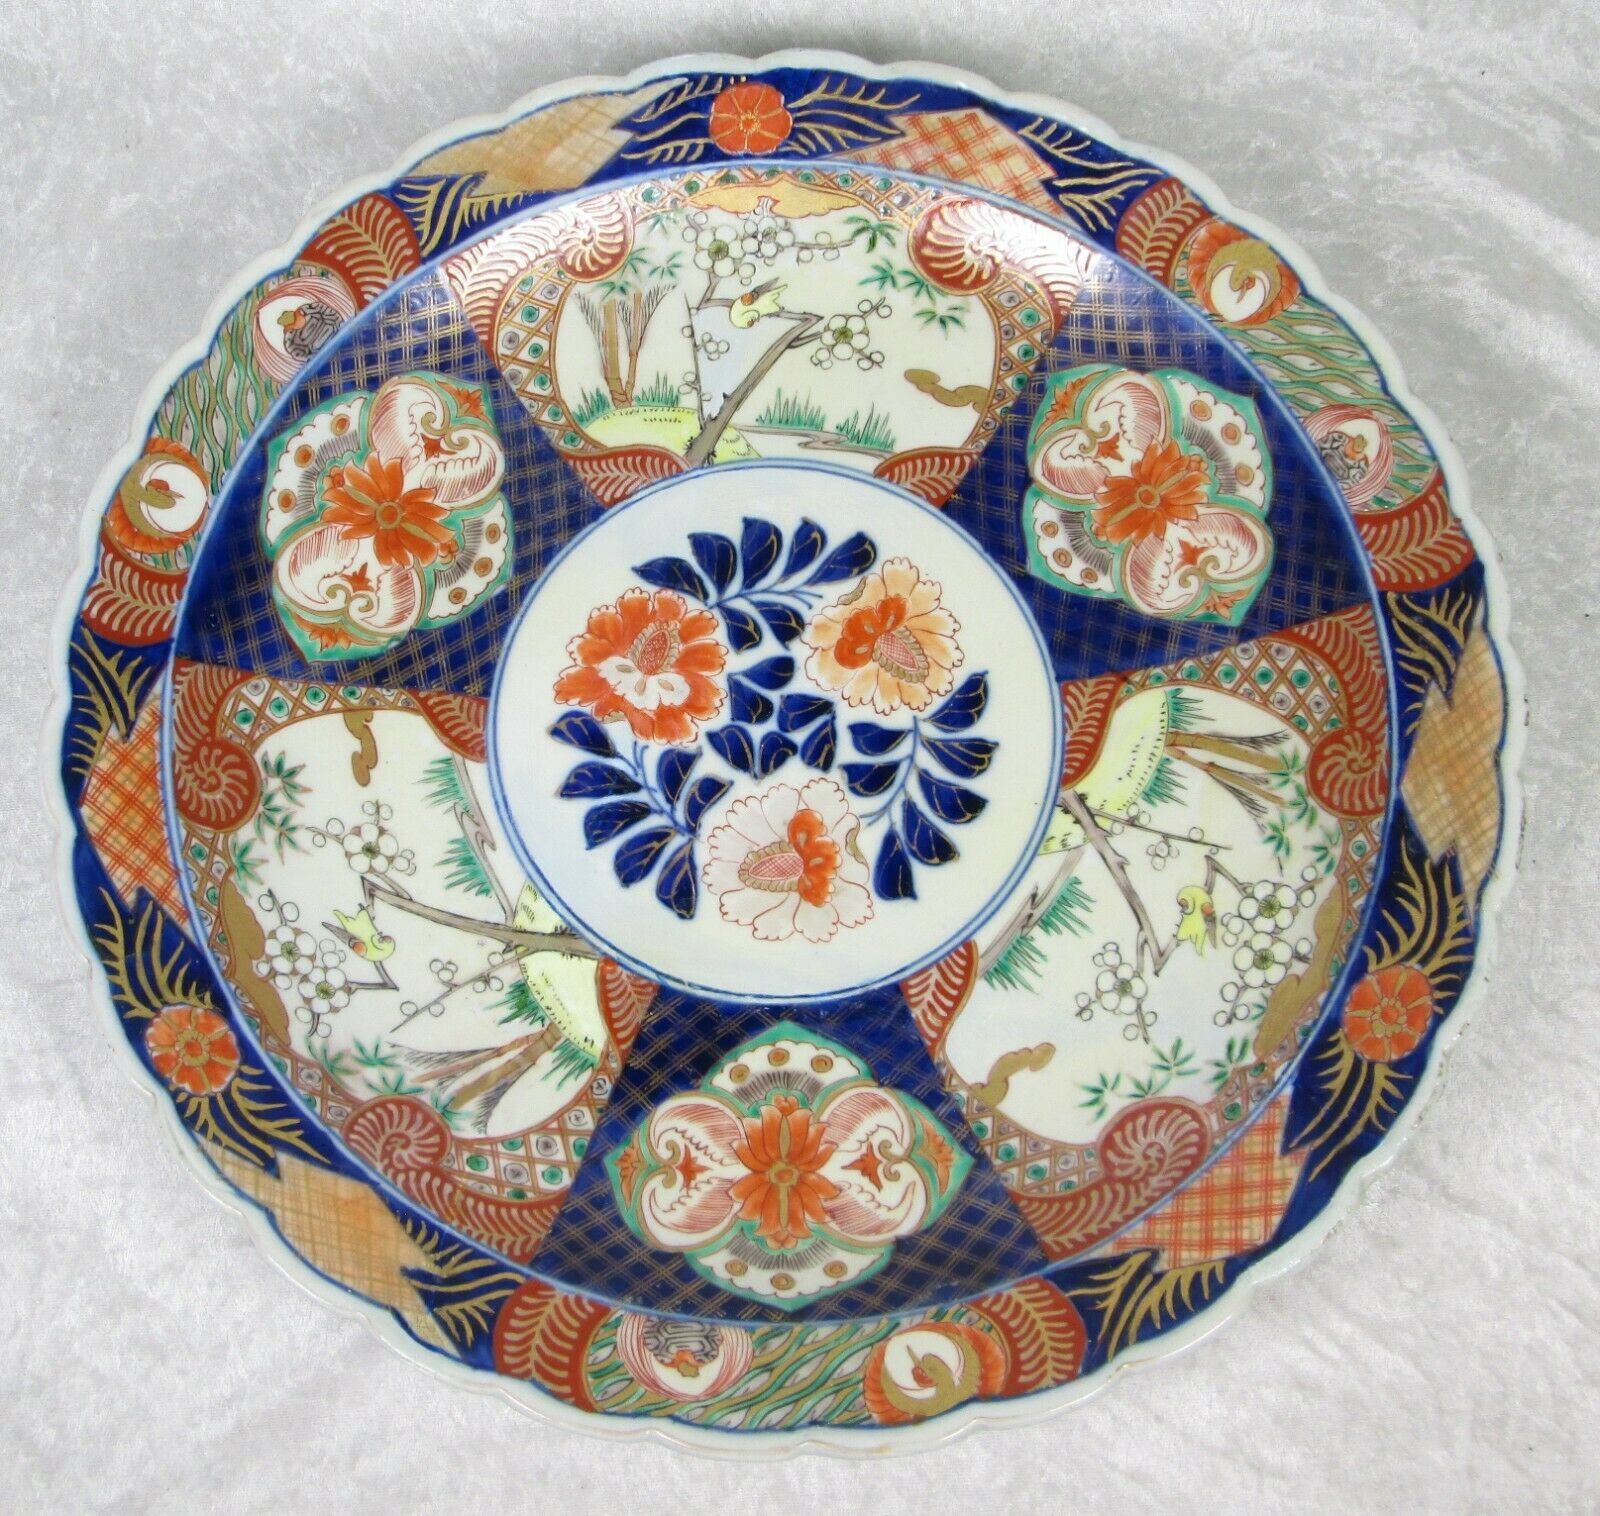 REPAIRED Antique Japanese Imari Charger Plate 16-1/2 inch Diameter Red Blue